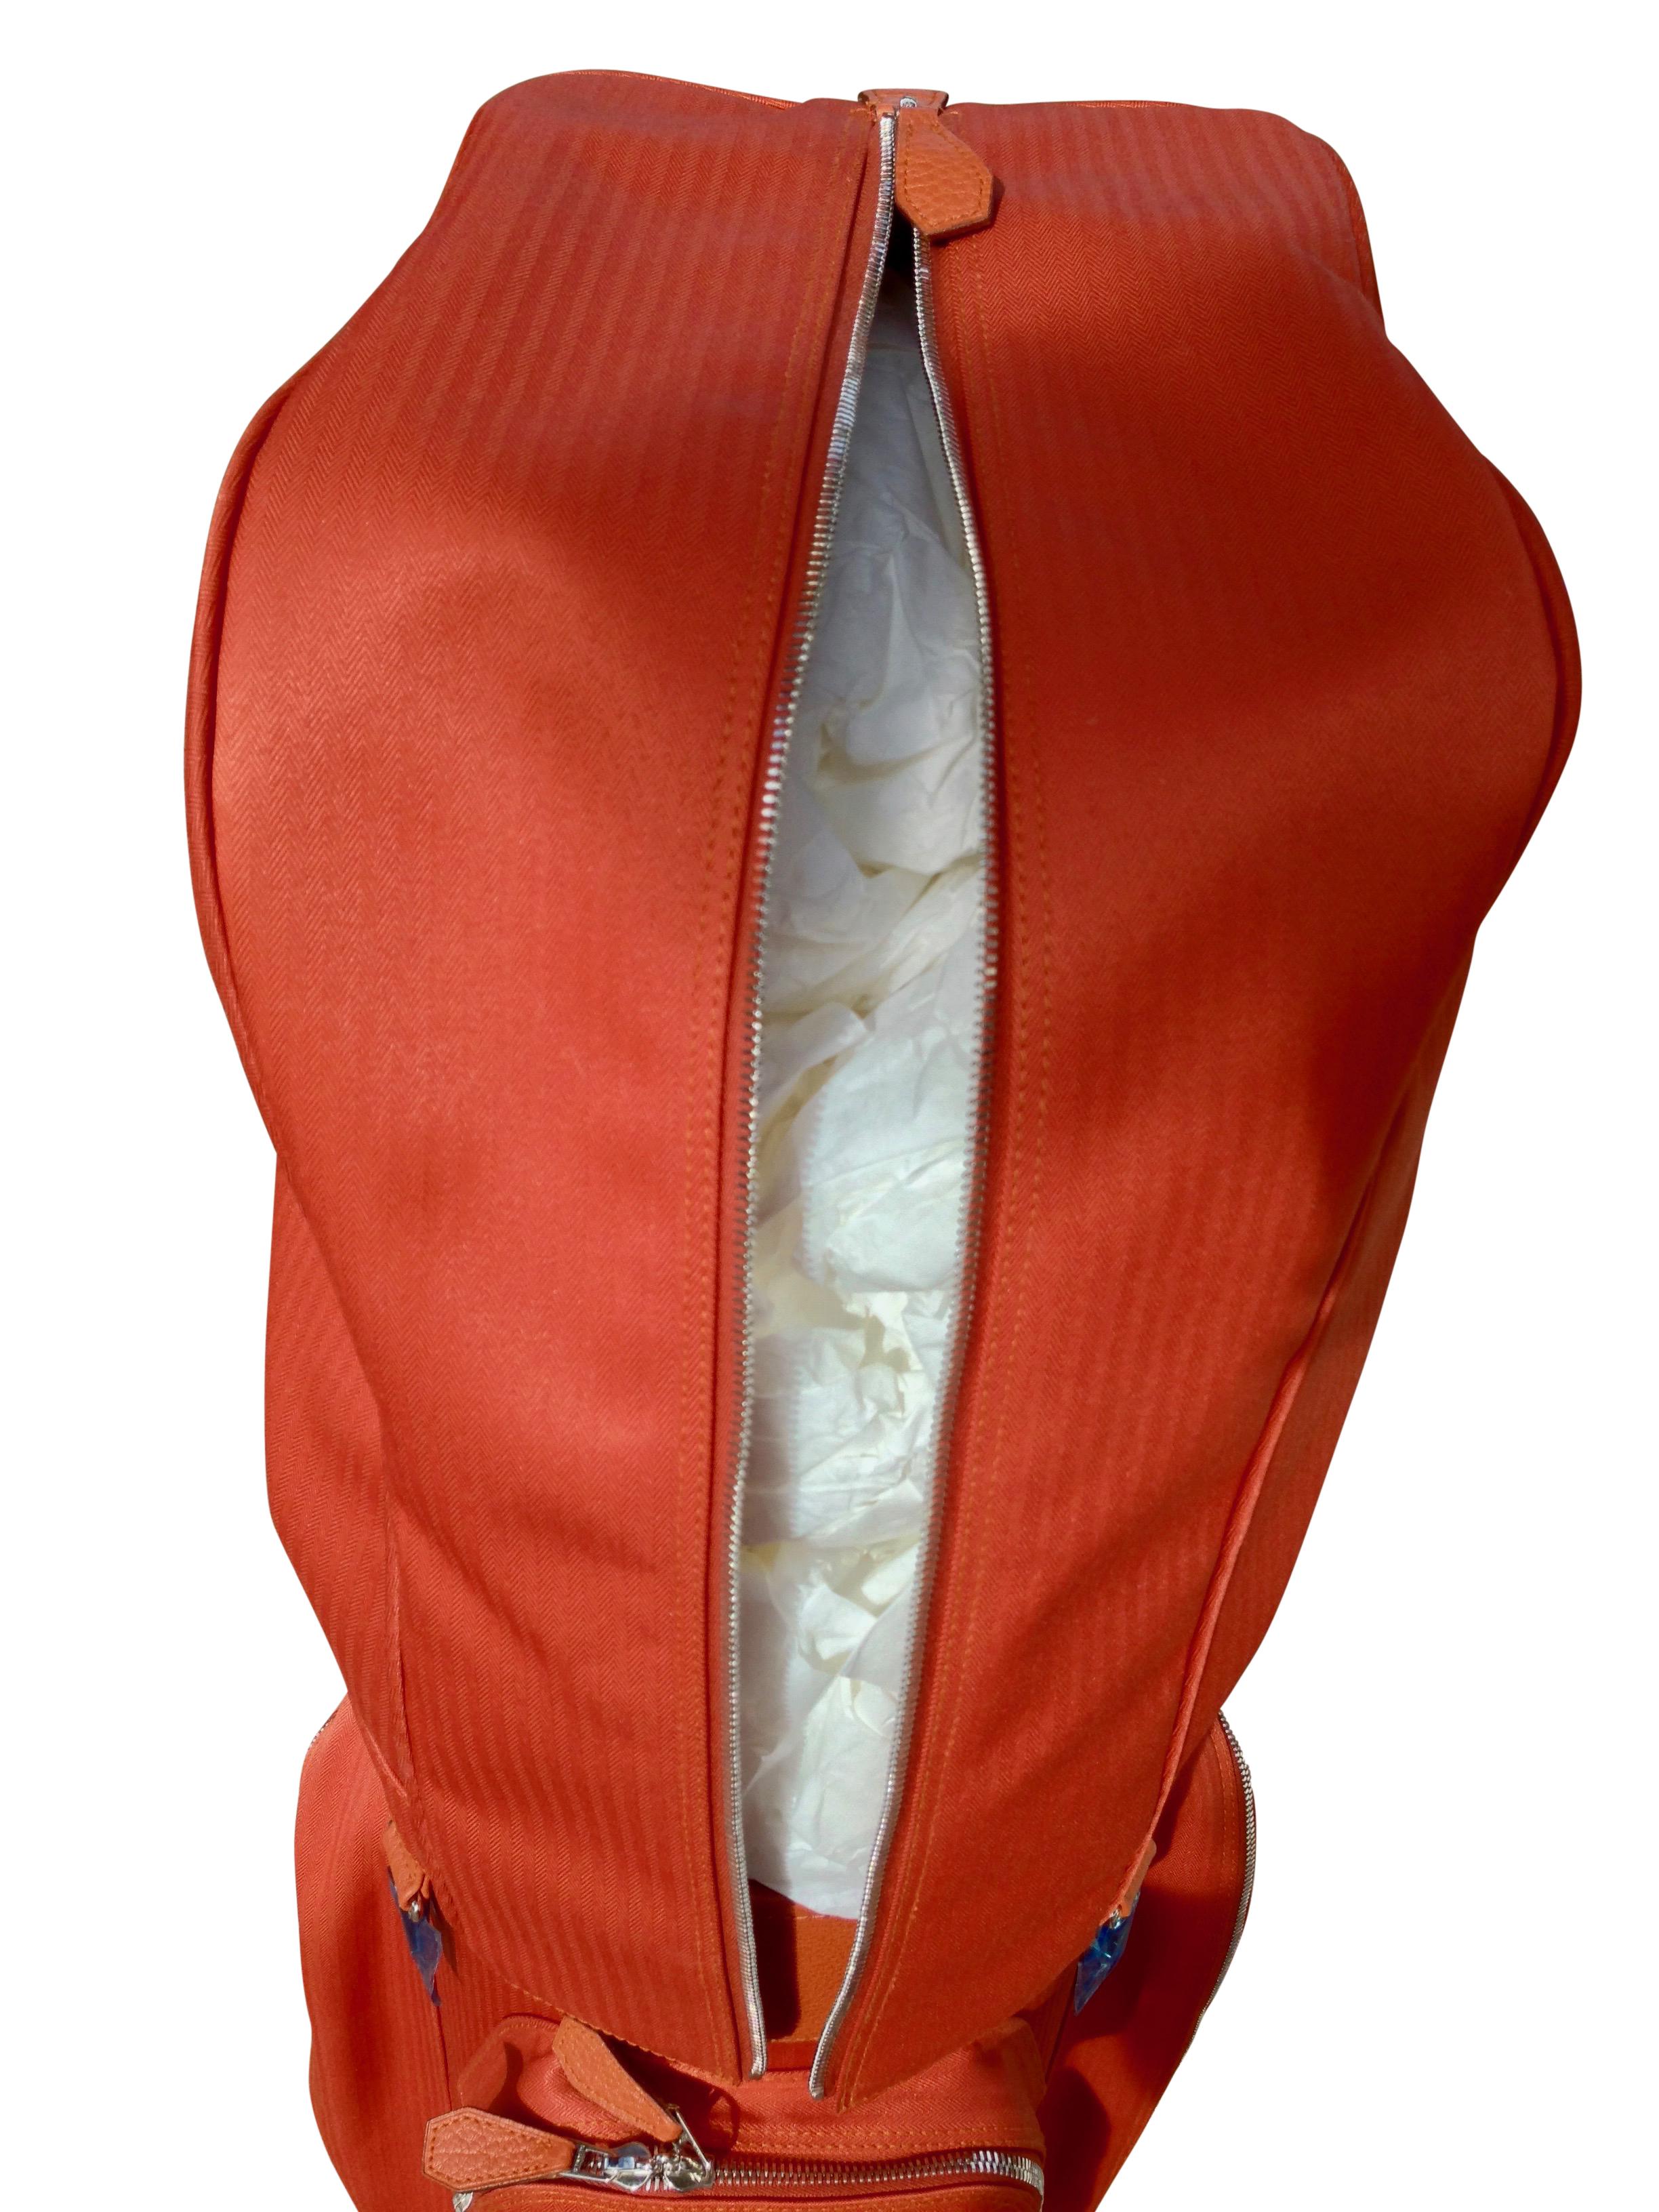 Hermes Golf Bag Limited Edition Tangerine Color Buffalo Leather, Made in France In Excellent Condition For Sale In Petaluma, CA